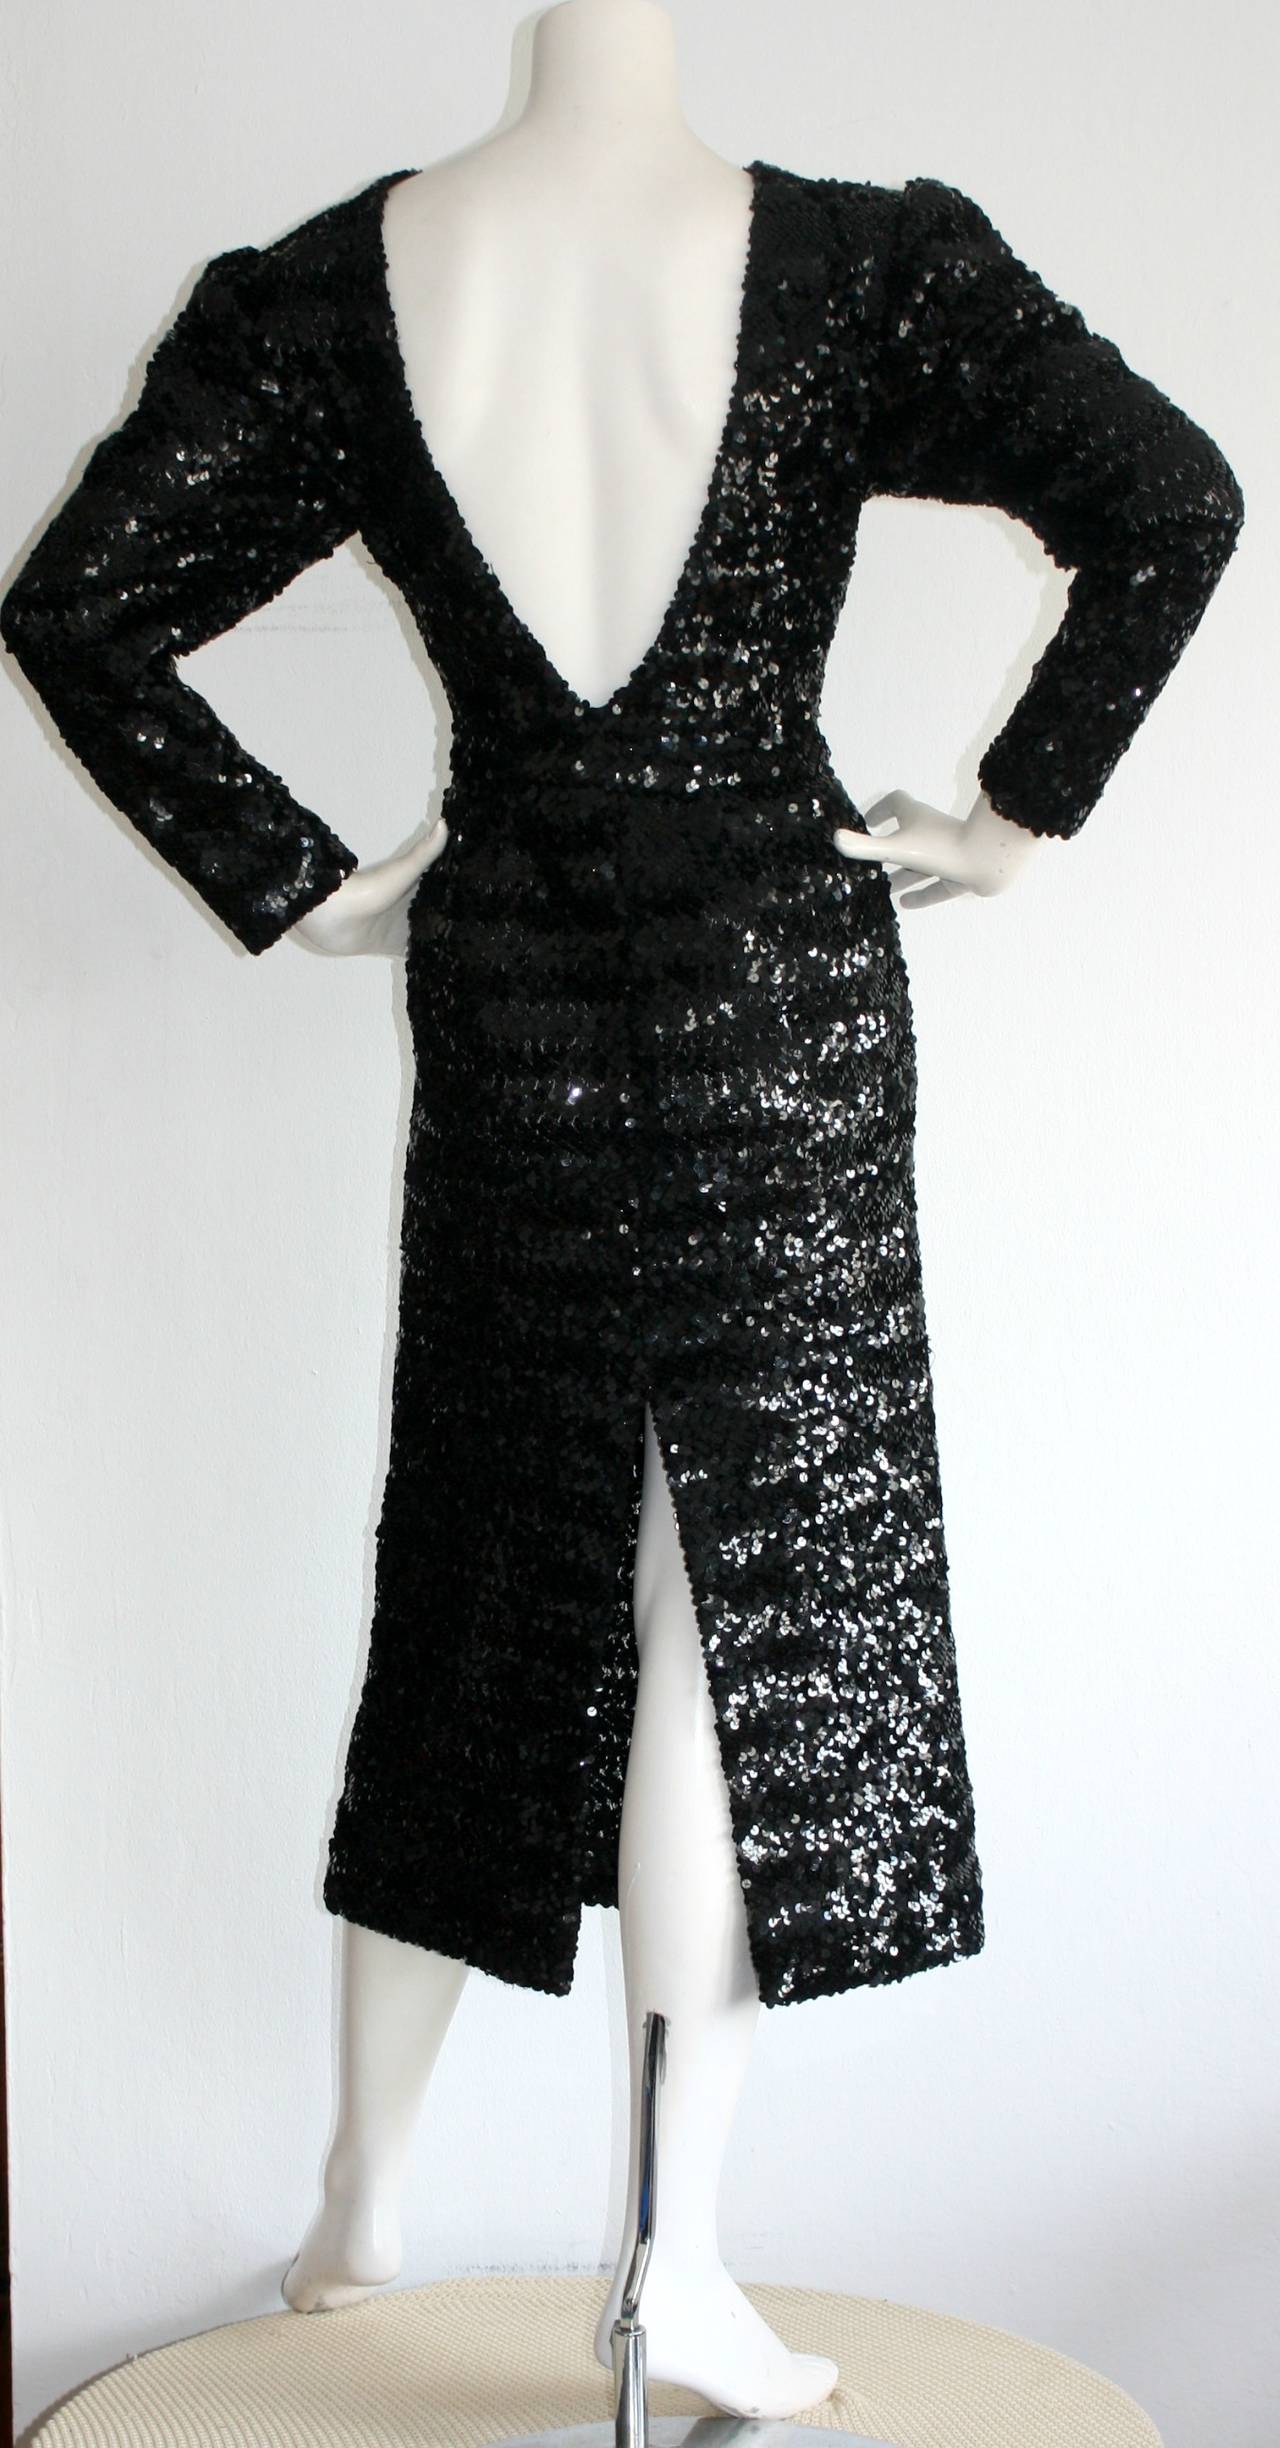 Stunning vintage Paco Rabanne black sequin dress! Features all-over sequins, and a sexy. plunging back. The perfect little black dress! Hidden zipper up side. In great condition. Approximately Size Small-Medium (Has stretch)

Measurements:
36-42